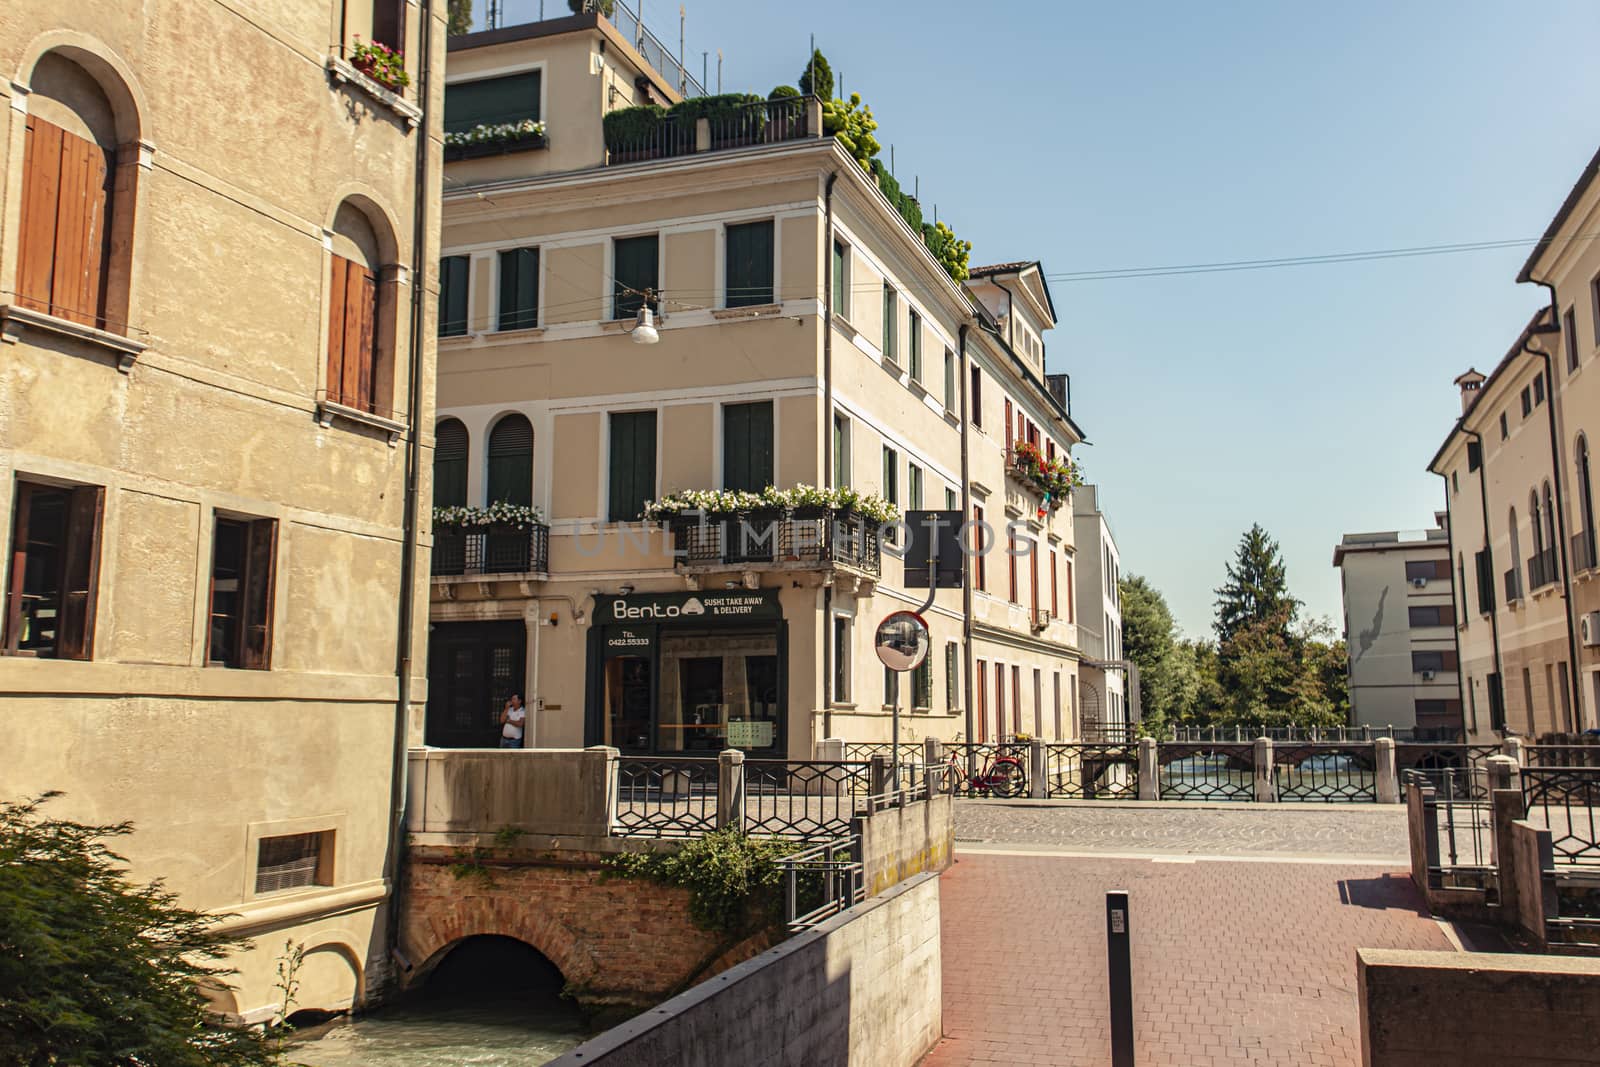 TREVISO, ITALY 13 AUGUST 2020: Bridge on Buranelli canal in Treviso in a Sunny summer day